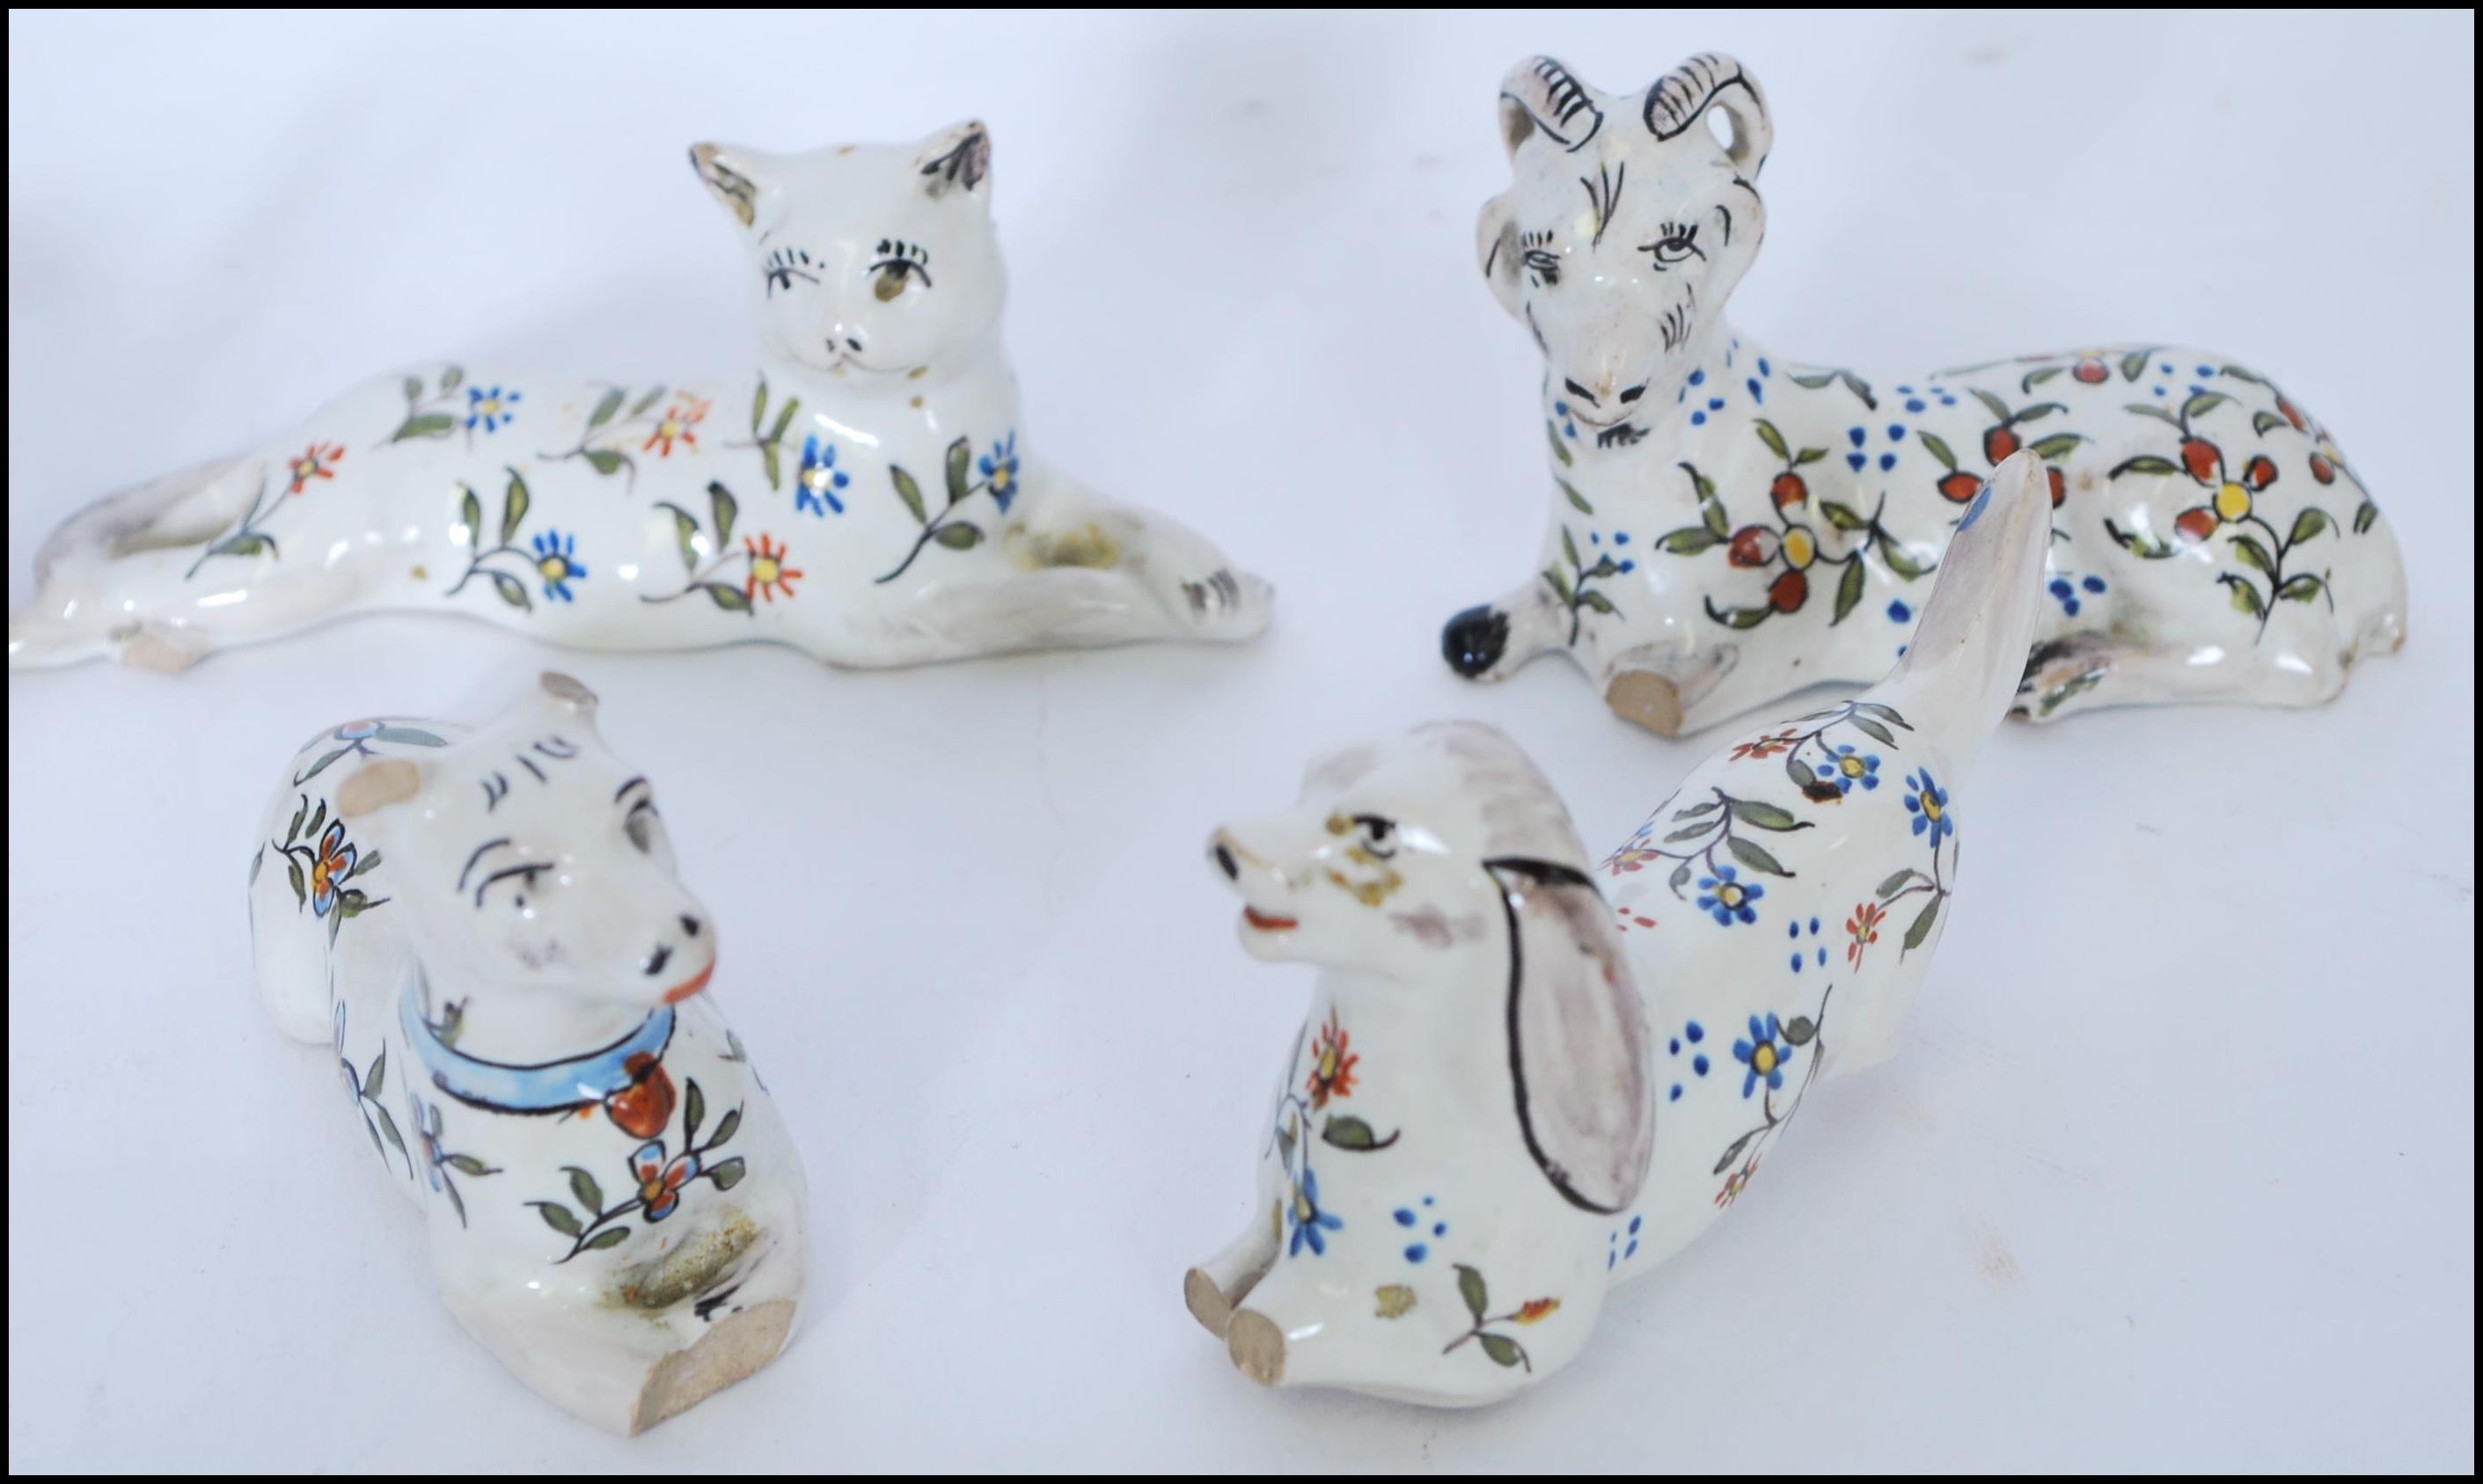 8 19TH CENTURY FRENCH FAIENCE PORCELAIN KNIFE RESTS IN THE FORM OF ANIMALS - Image 2 of 5